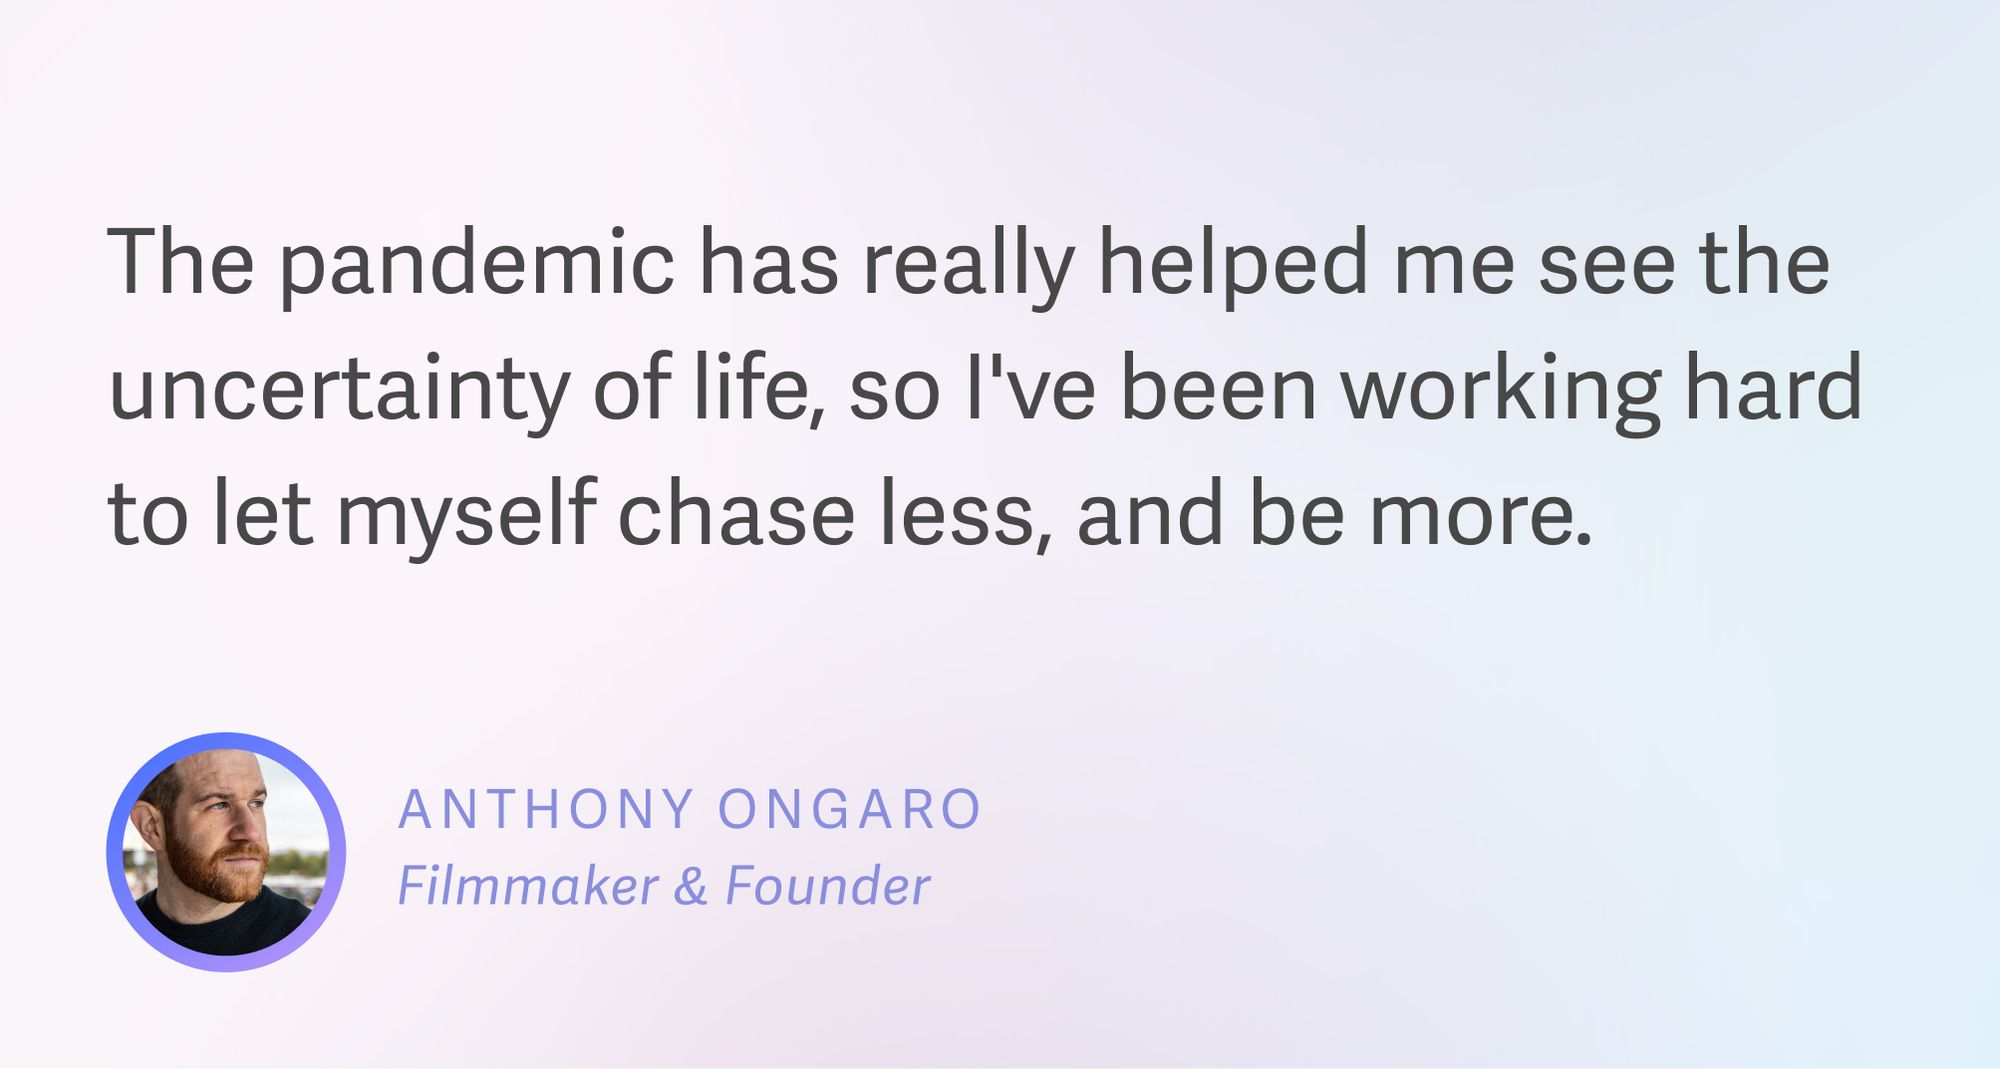 Anthony Ongaro on self acceptance during the pandemic.